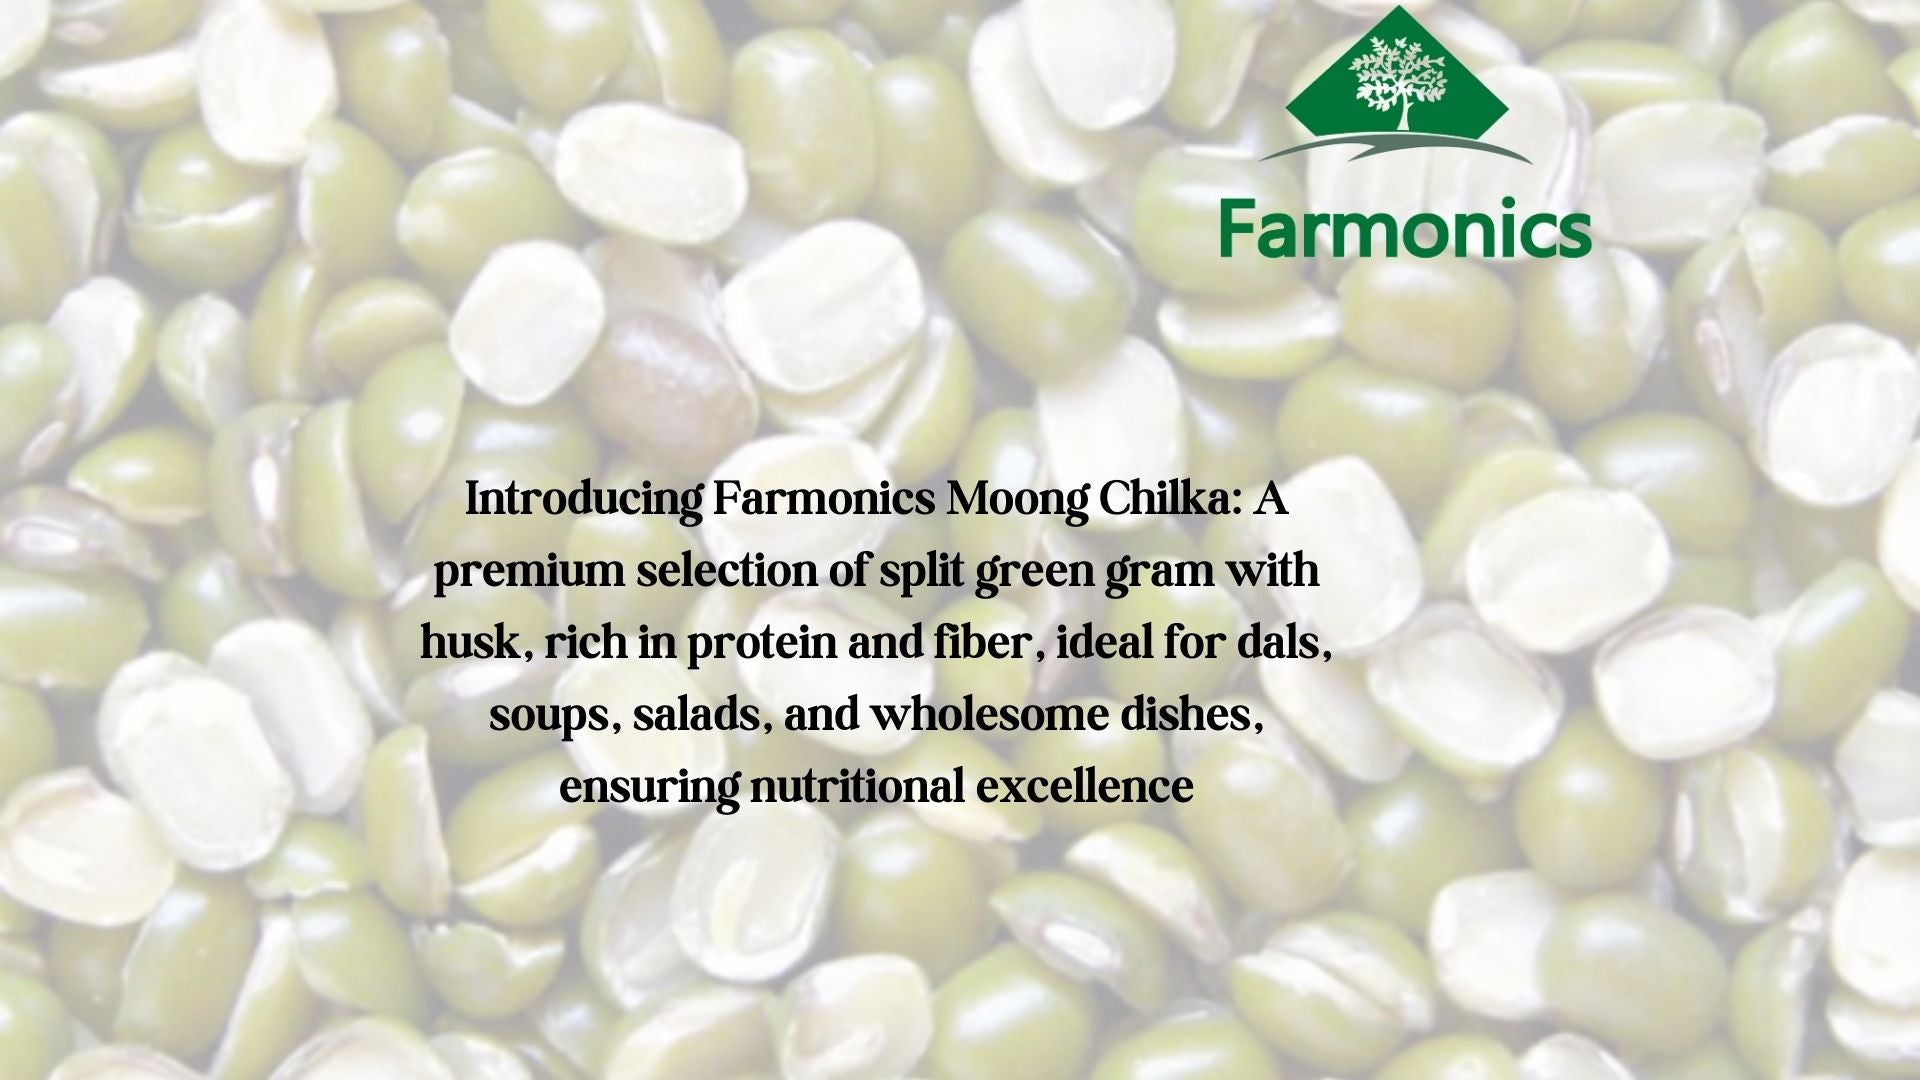 Here are some of the information about Farmonics best quality moong chilka